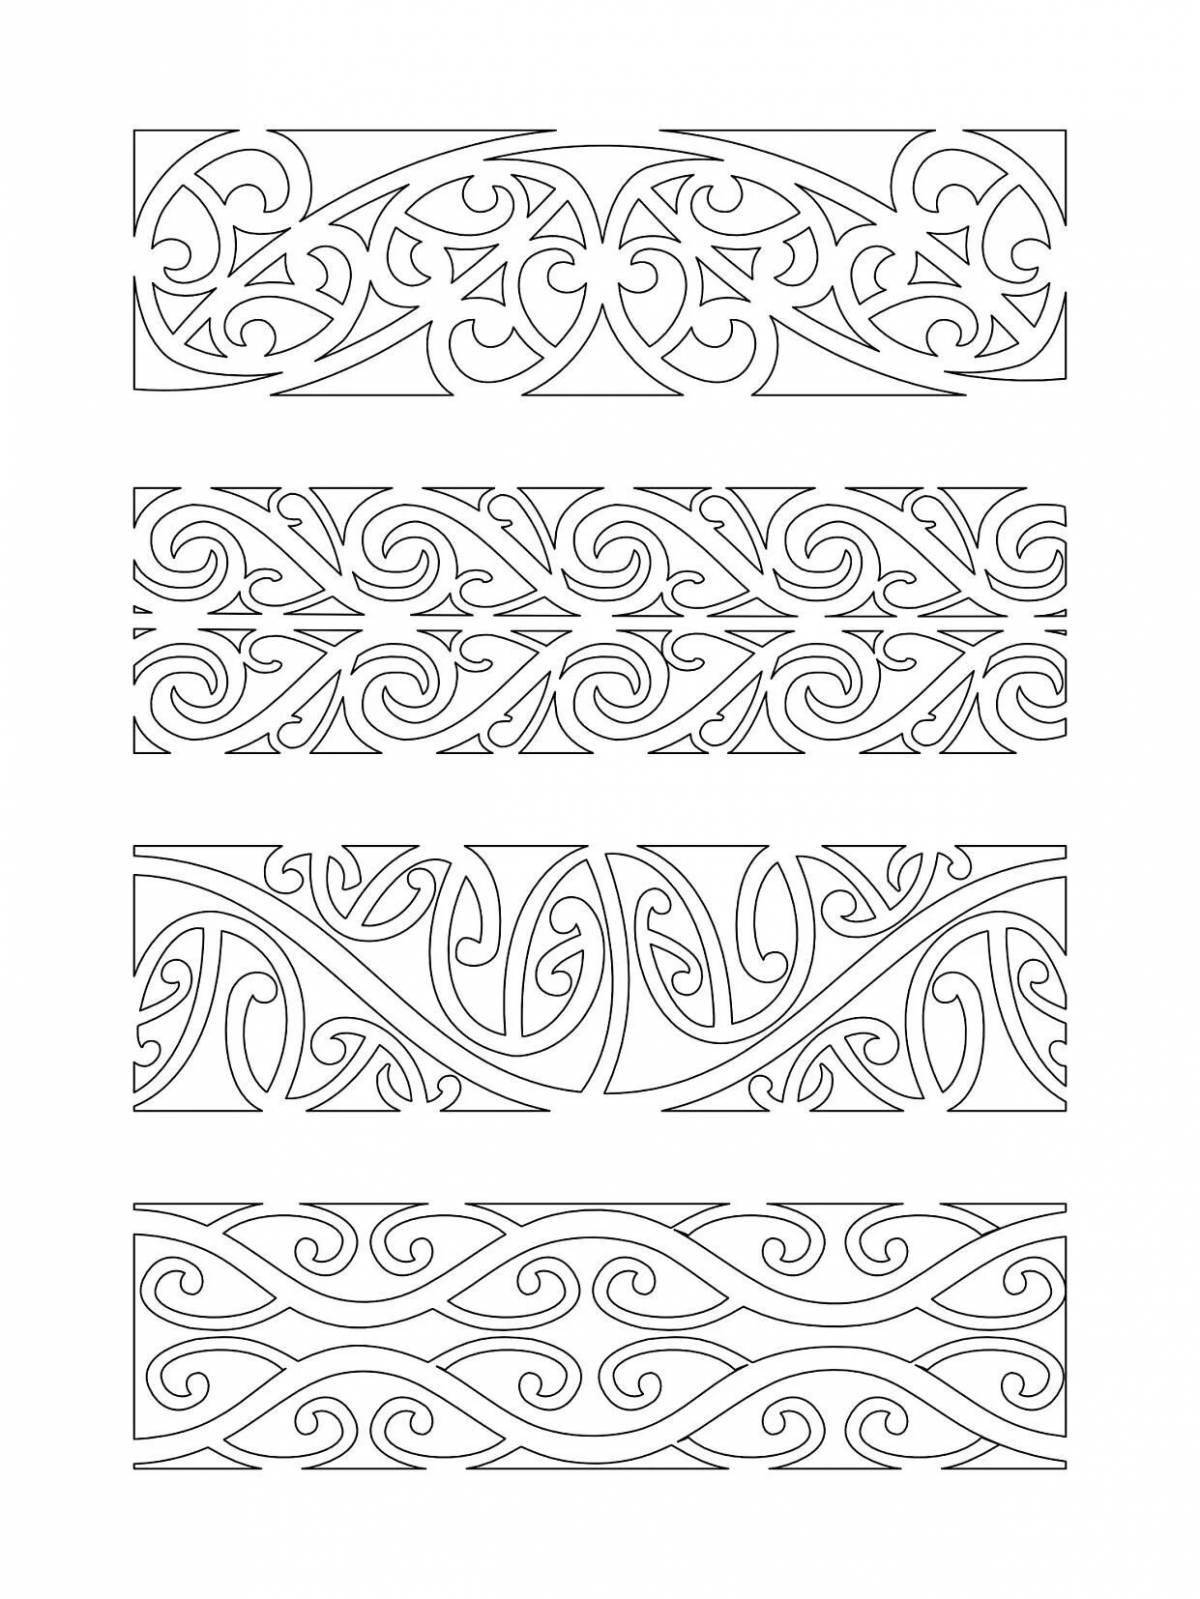 A strikingly bold striped coloring page